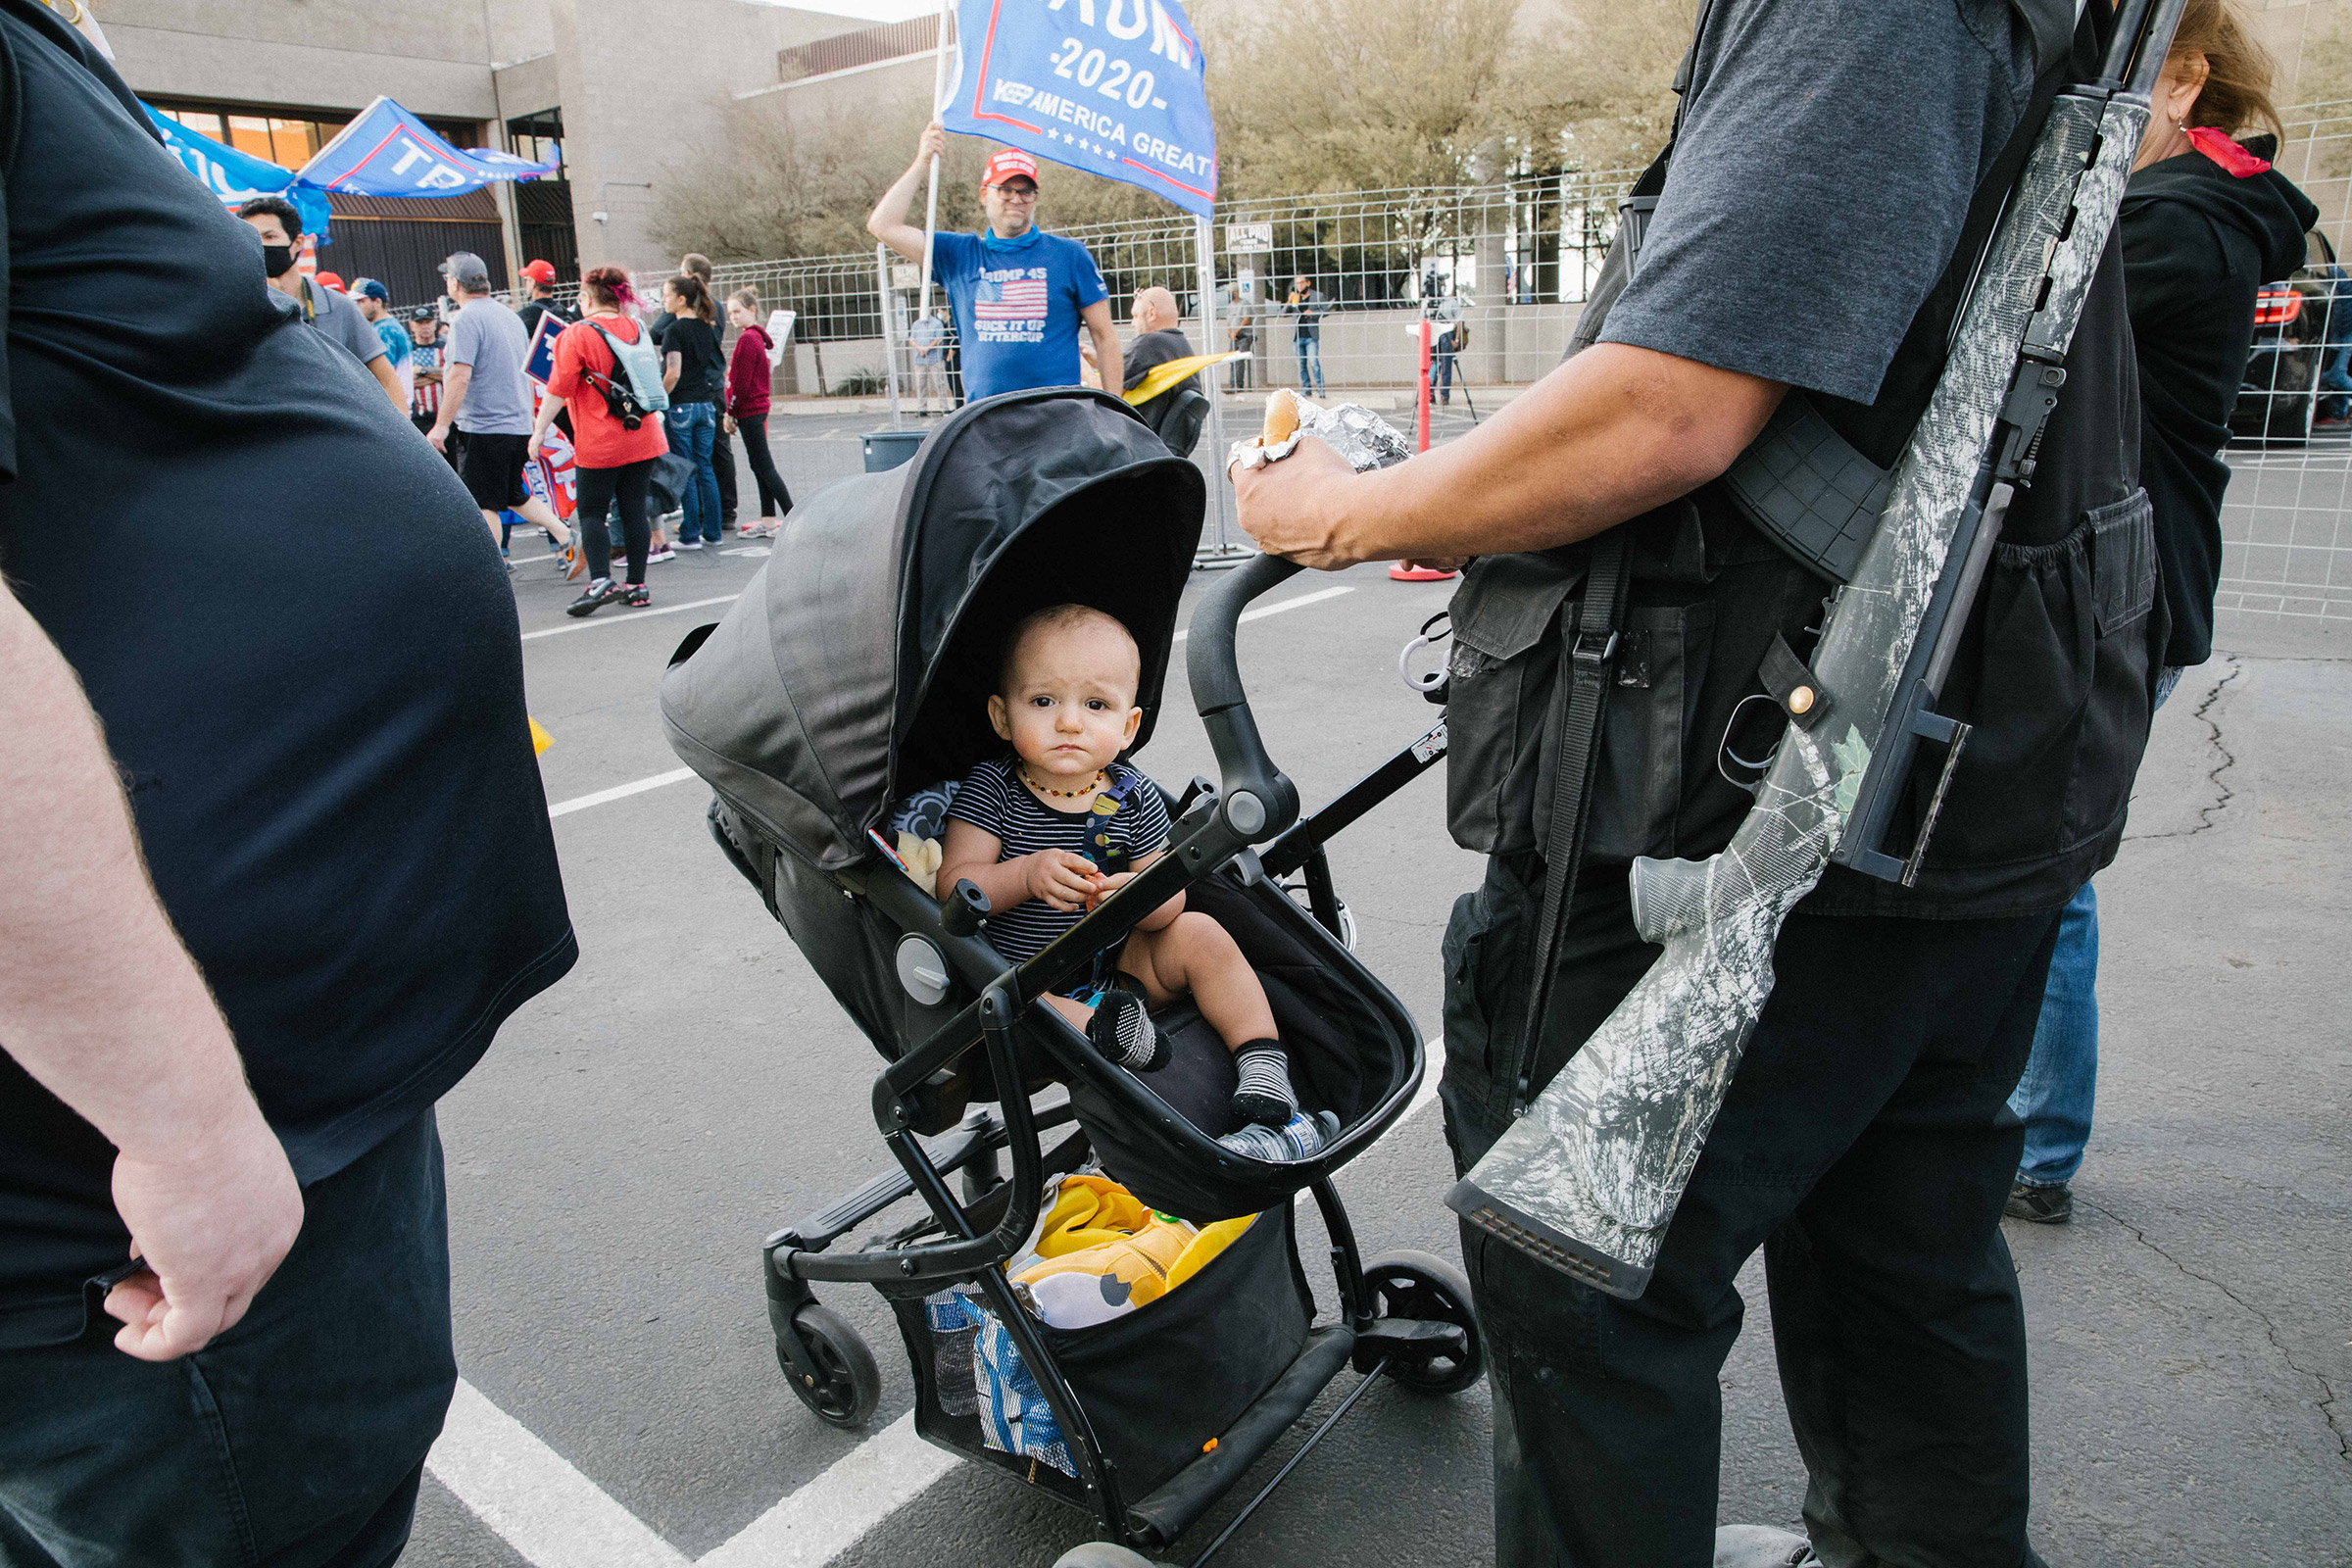 A baby and a gun at the Maricopa County Elections office in Phoenix, AZ on November 7, 2020